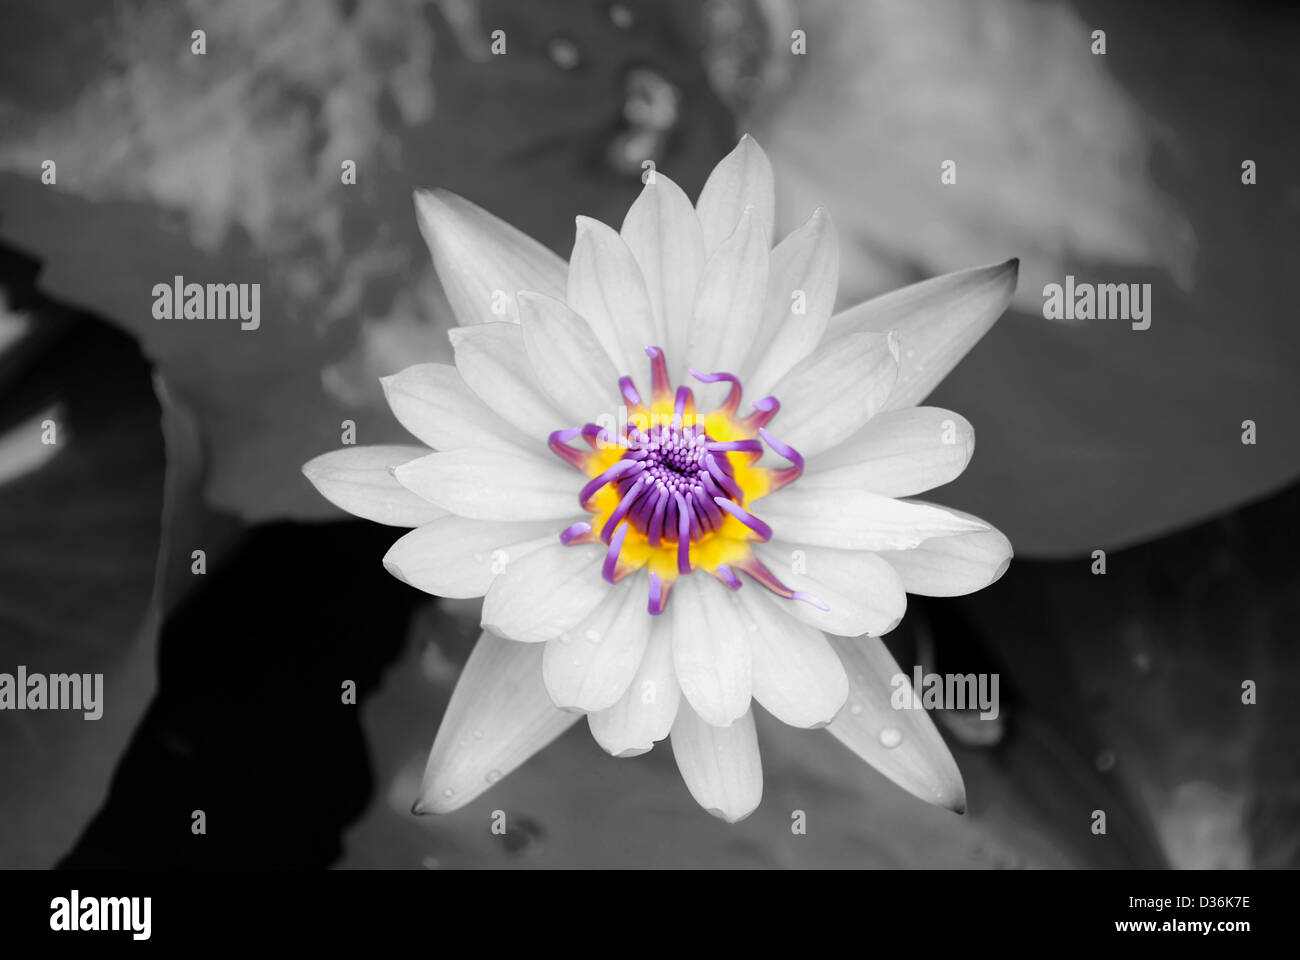 Water lily flower Latin name Nymphaea colorata Stock Photo